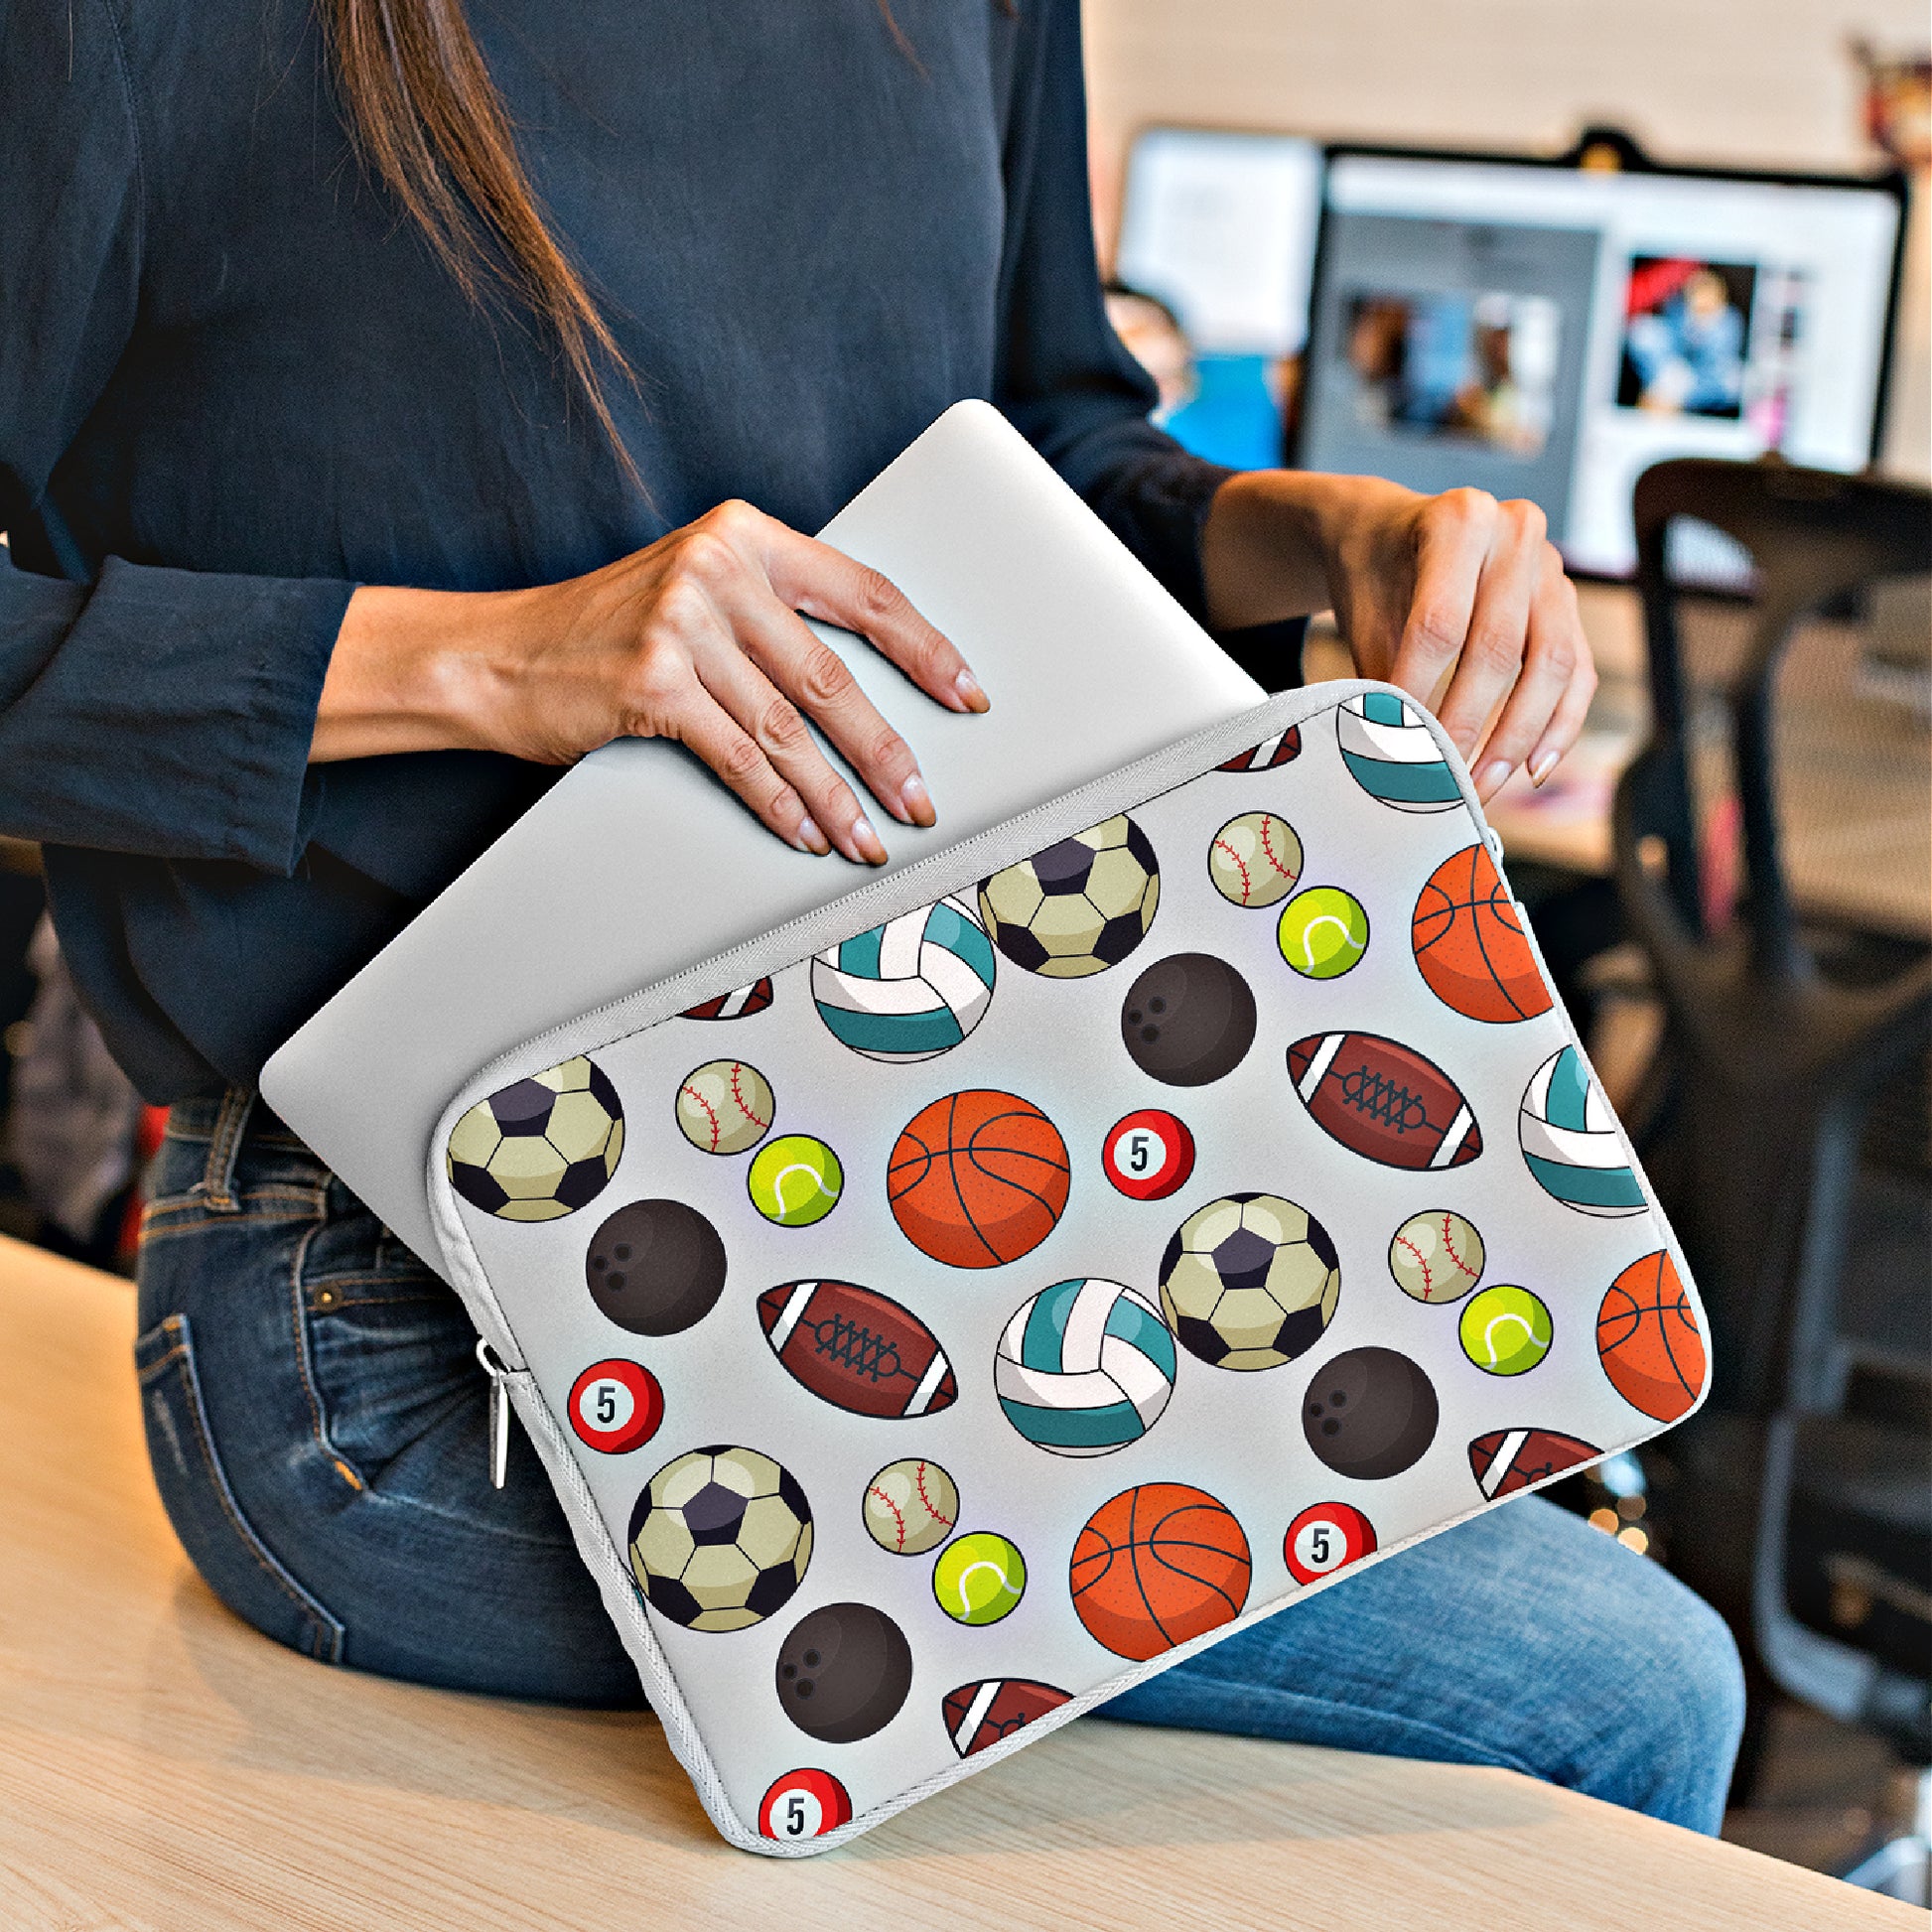 Mock up of a woman holding a computer sleeve with laptop.